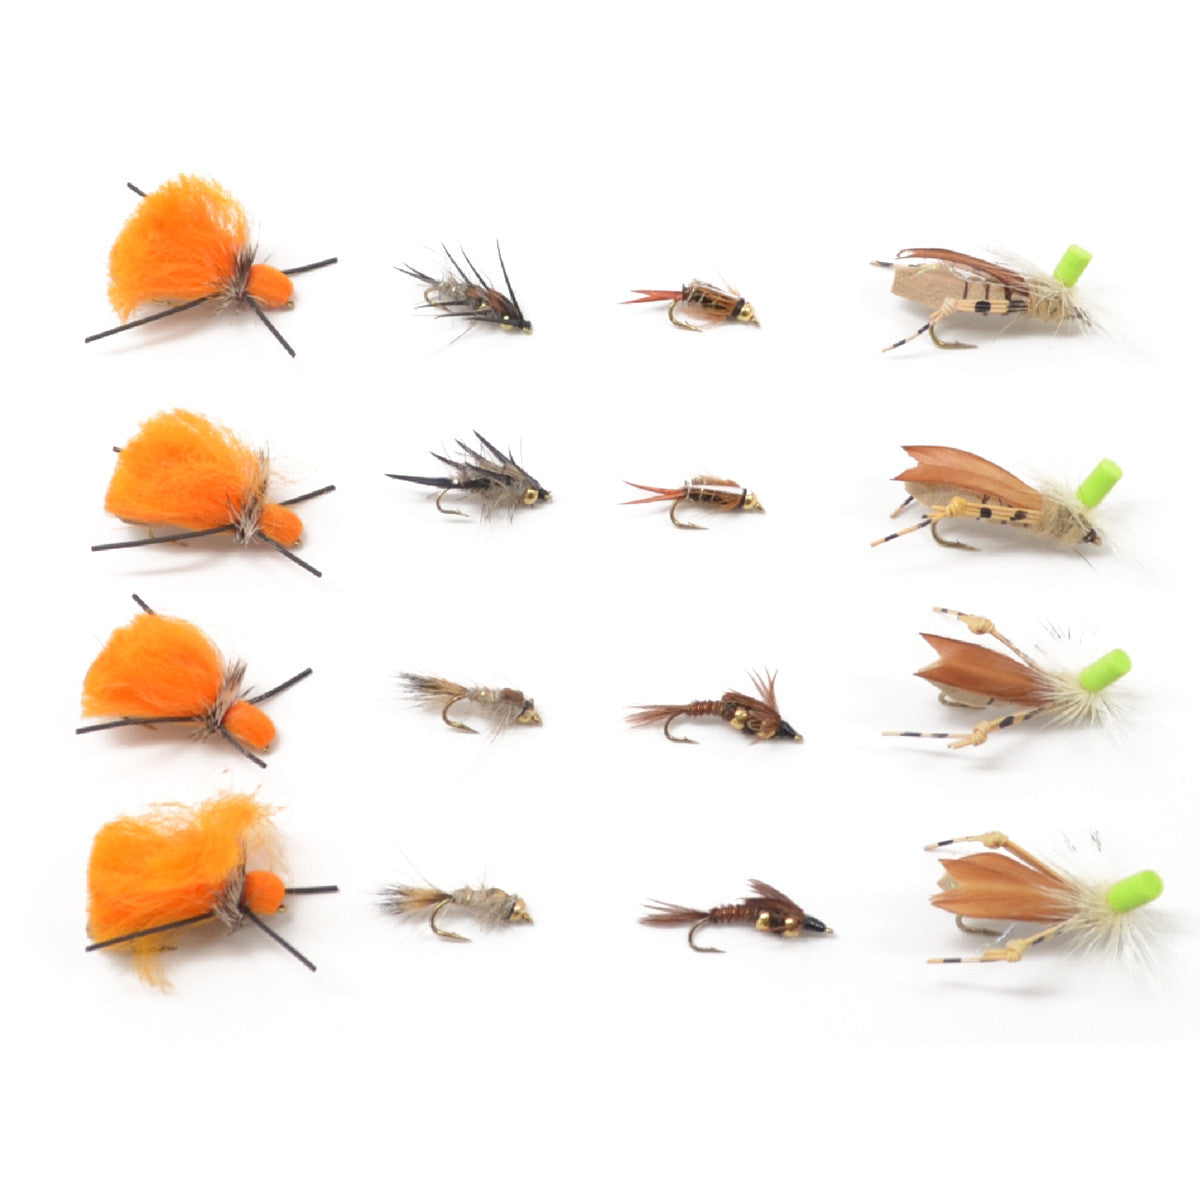 Trout Fly Assortment - Essential Western Dry and Nymph Fly Fishing Fli